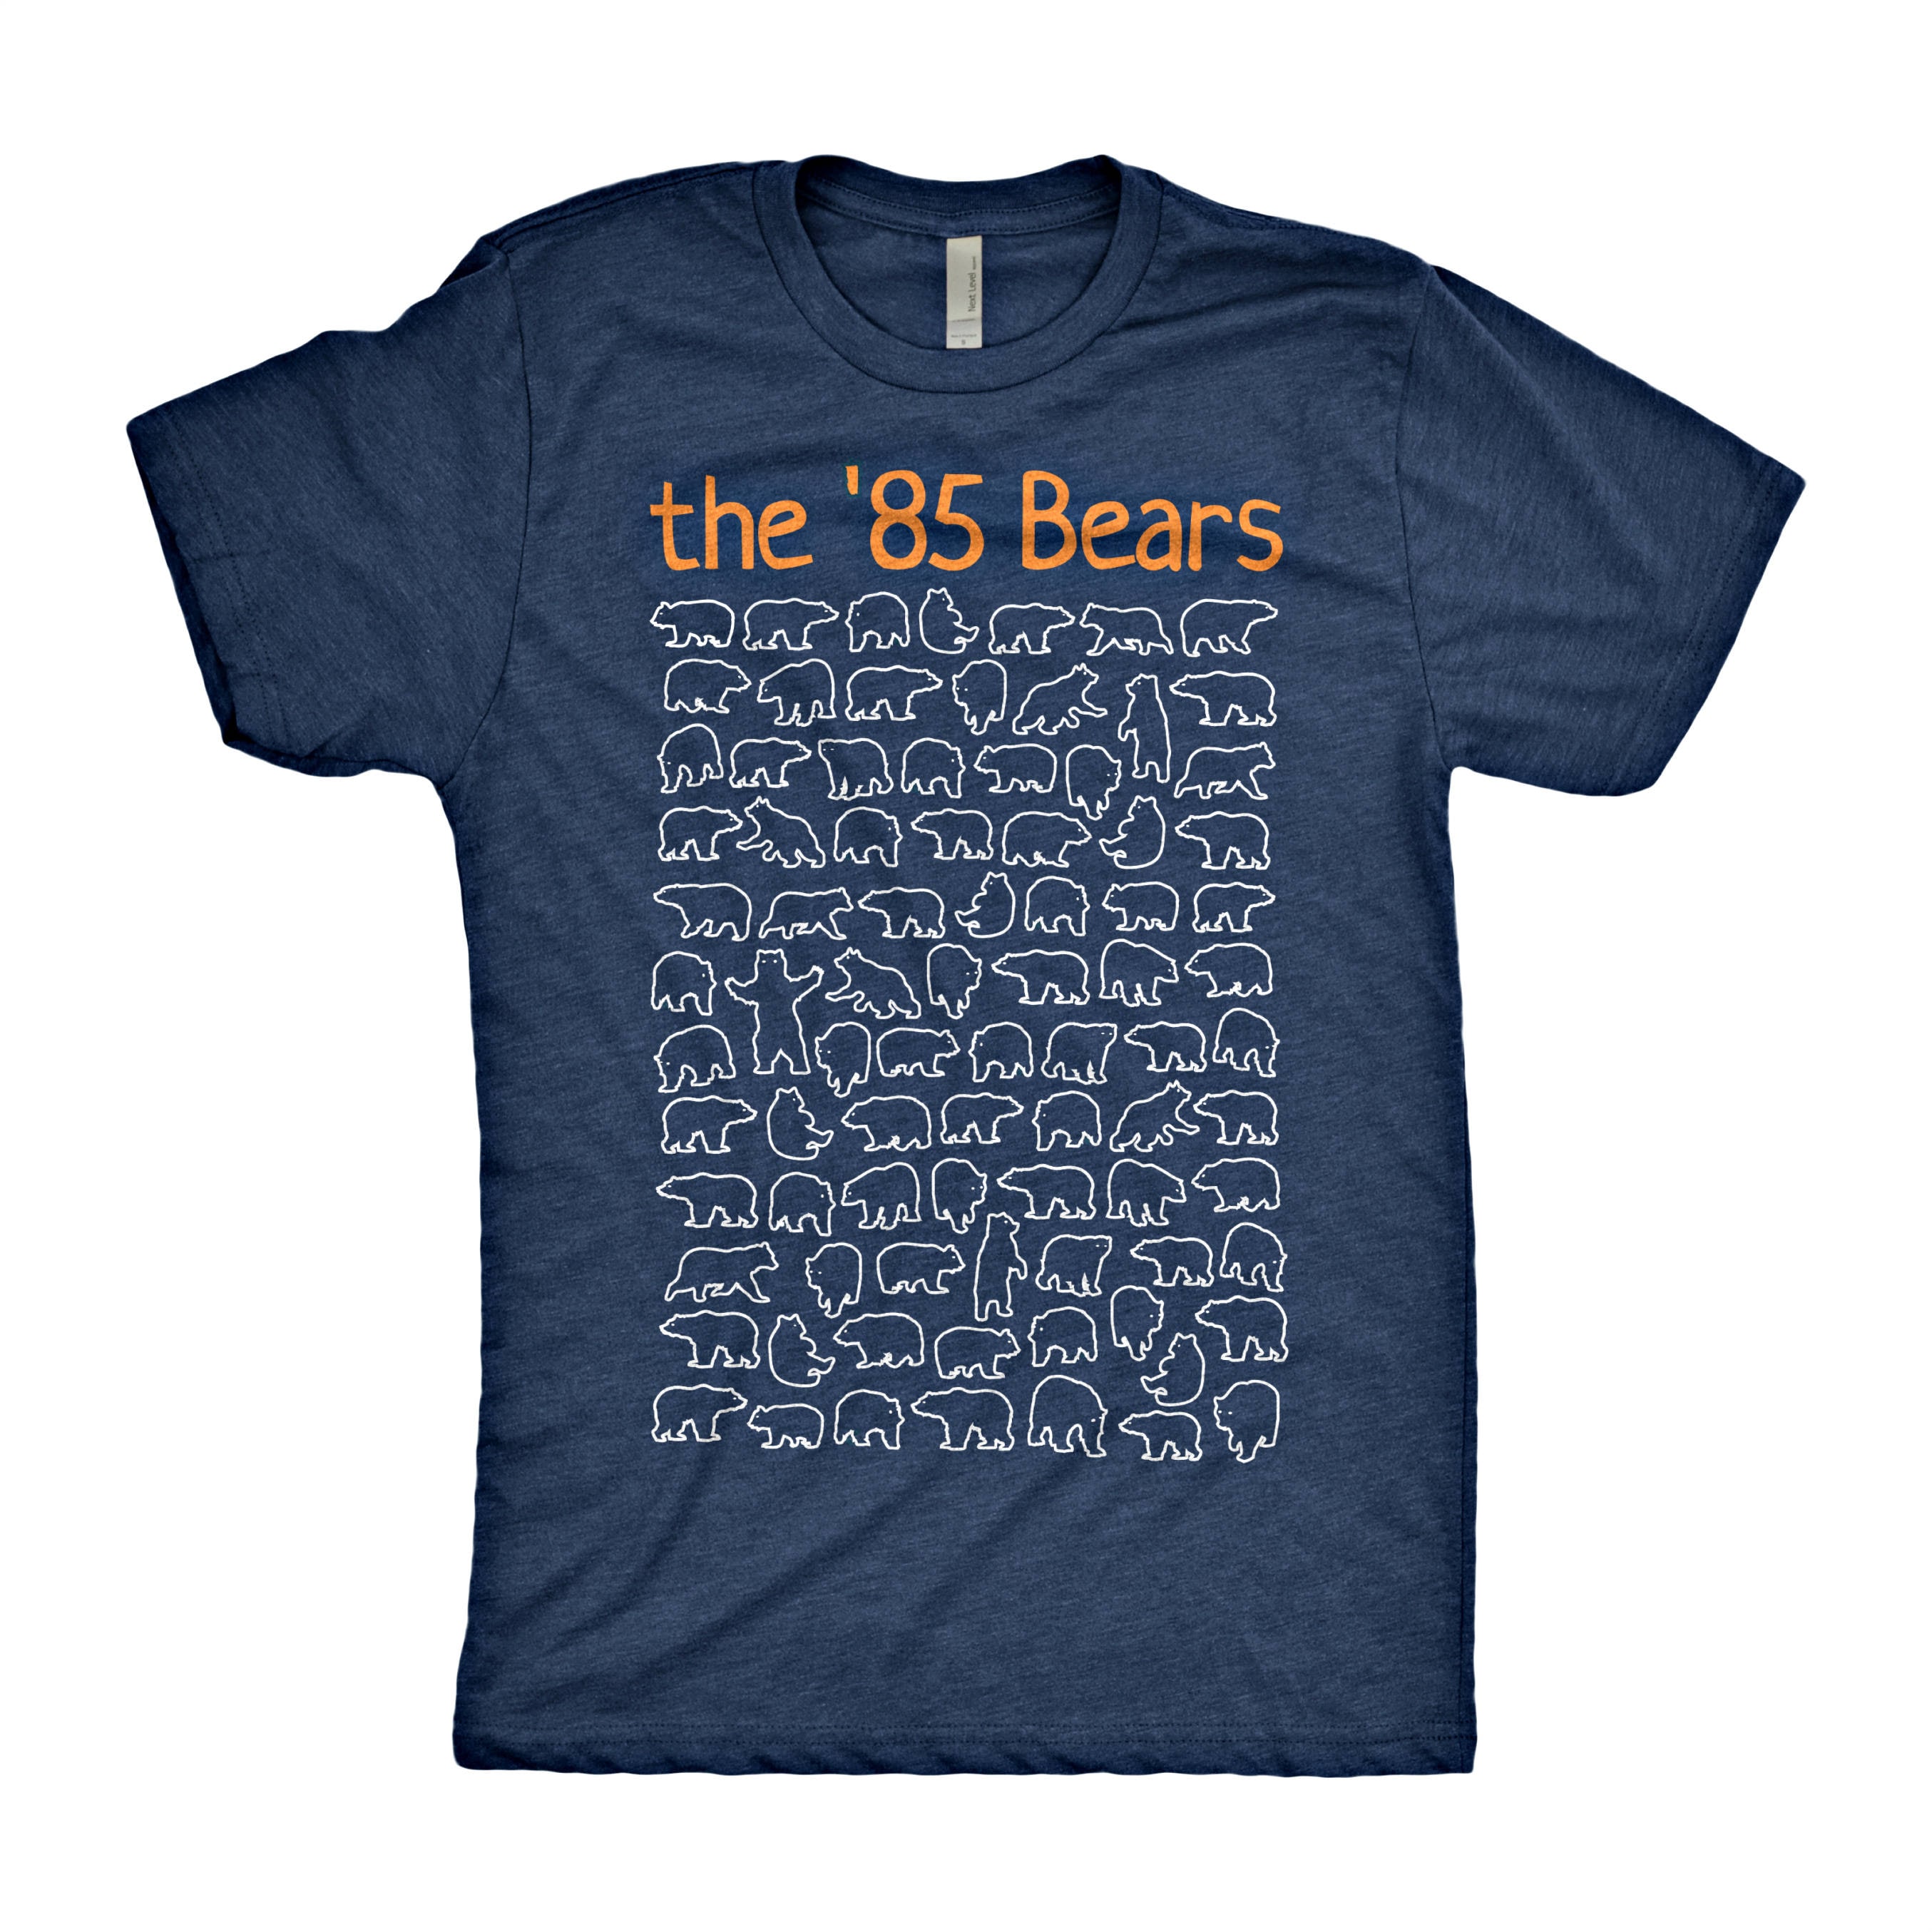 chitownclothing Unique 85 Chicago Bears T-Shirt